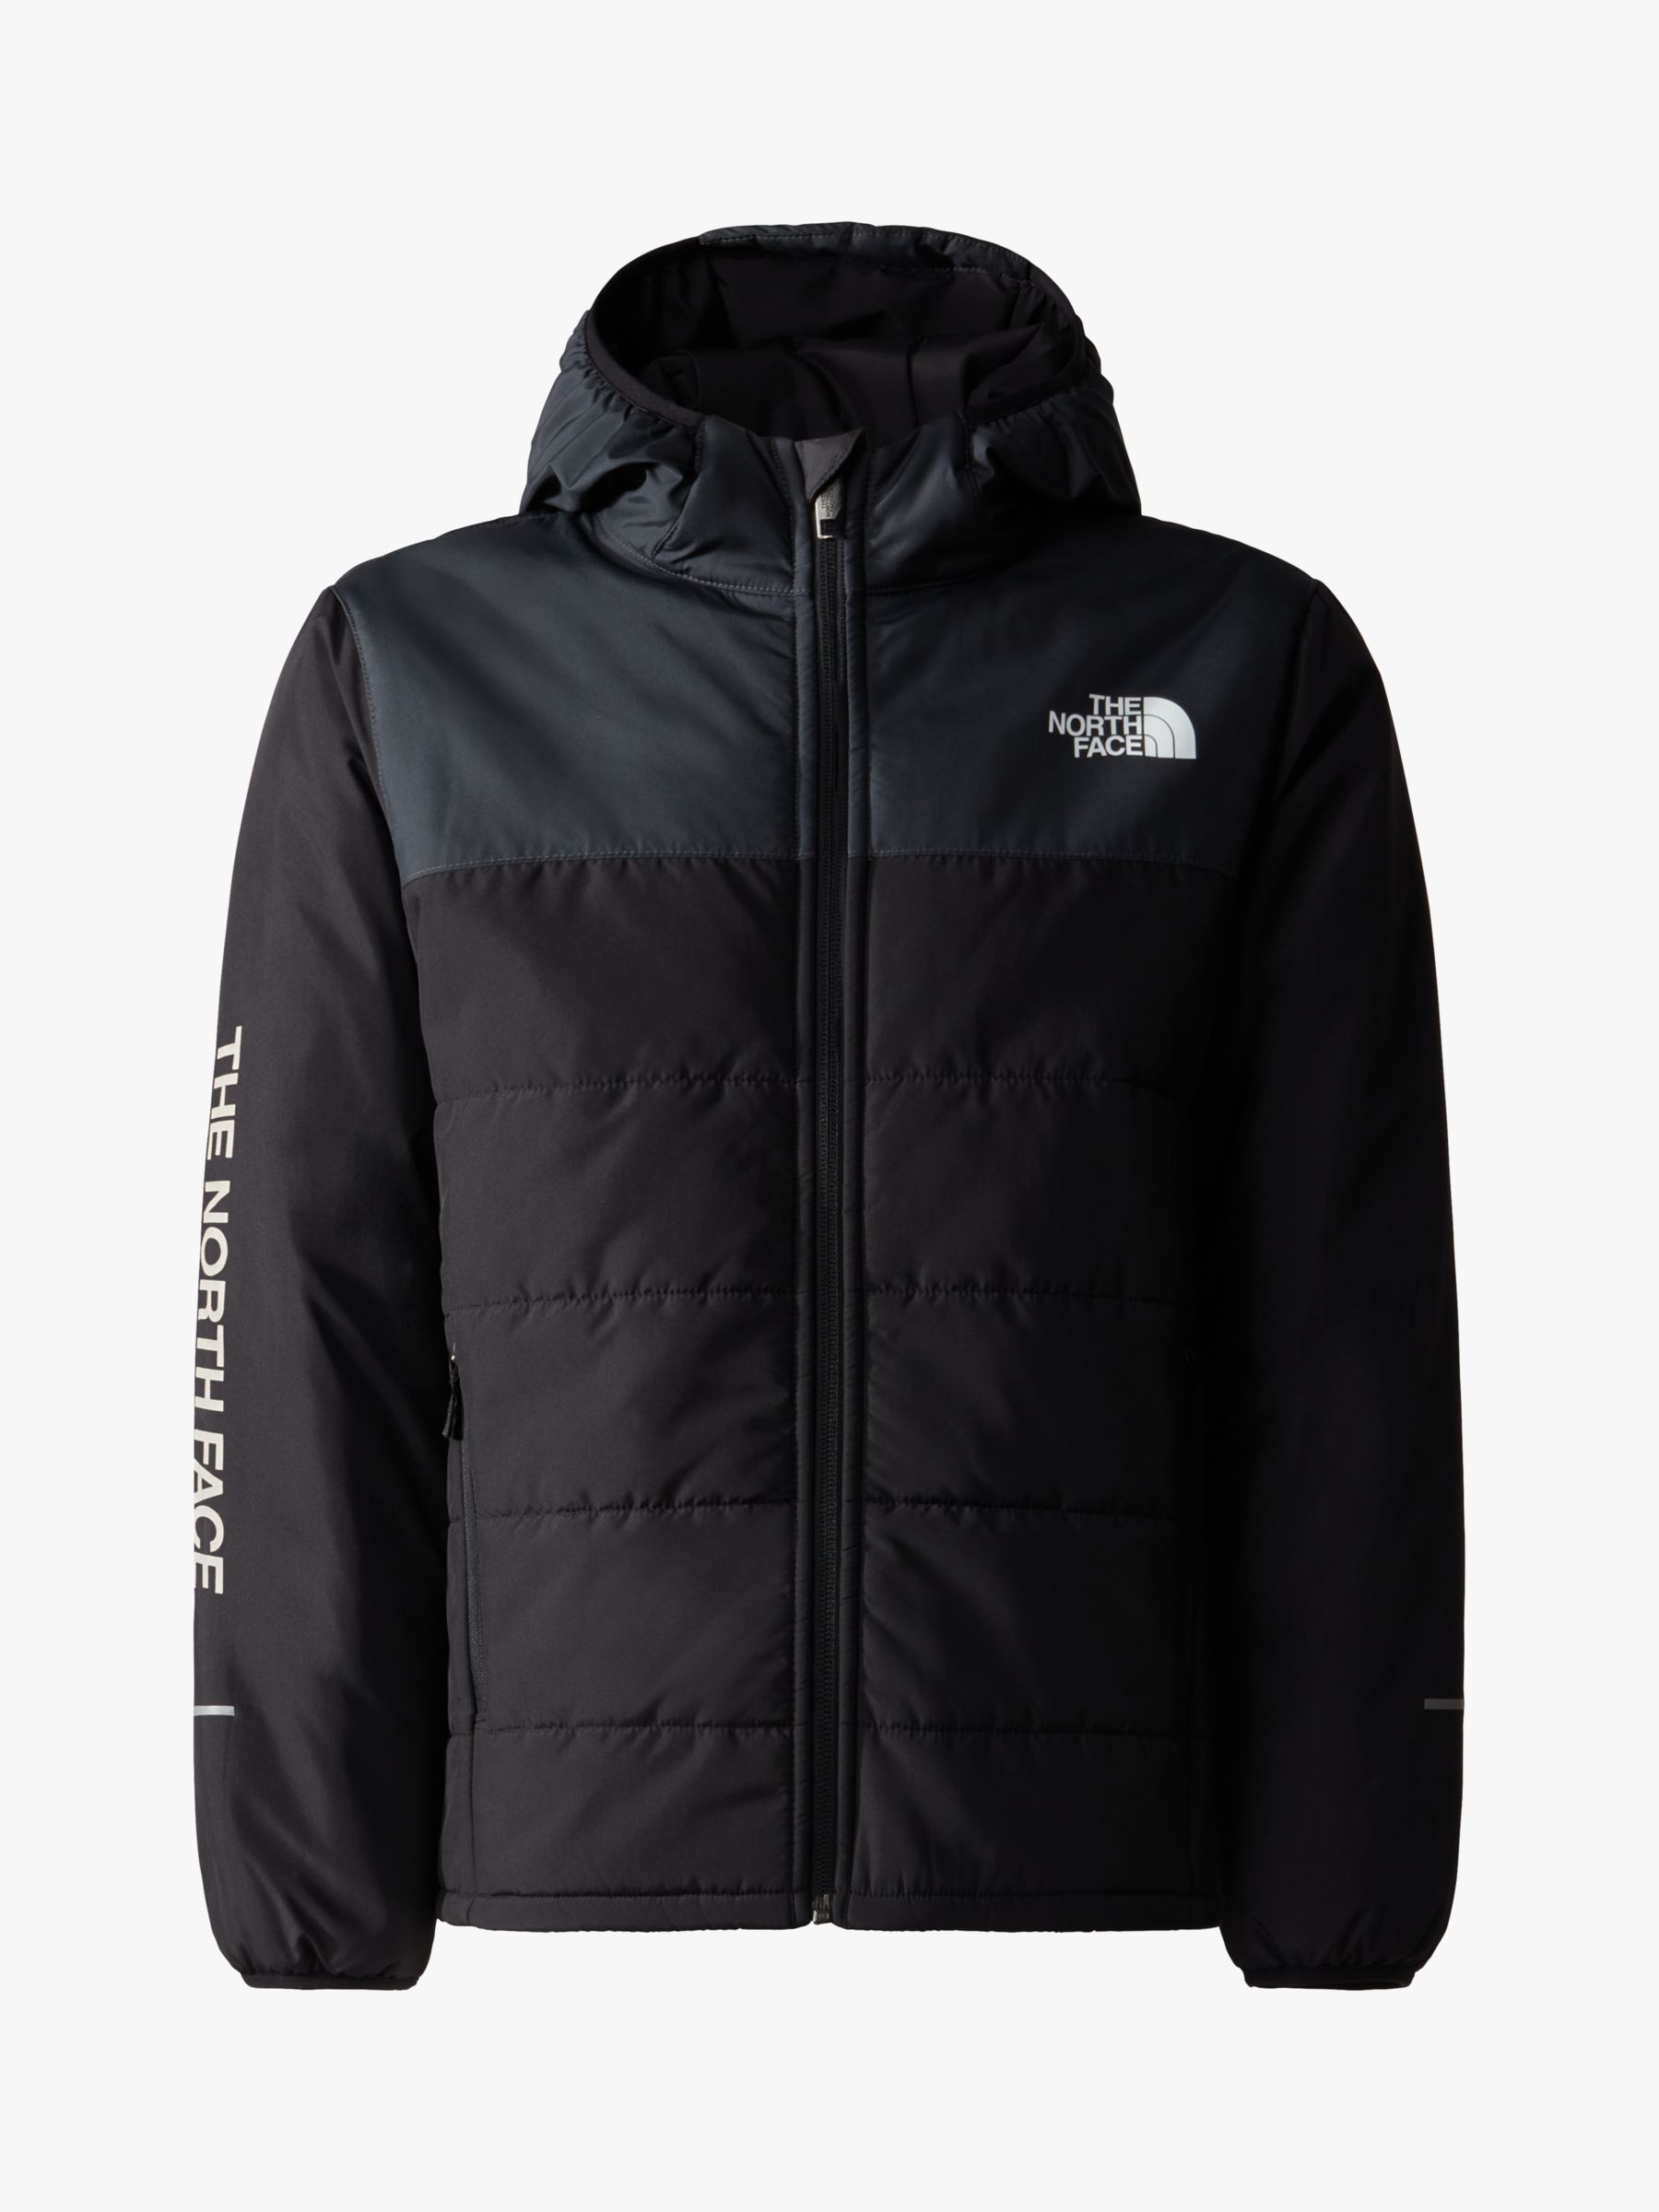 The North Face Kids' Never Stop Insulated Jacket, Grey/Black, 7-8 years